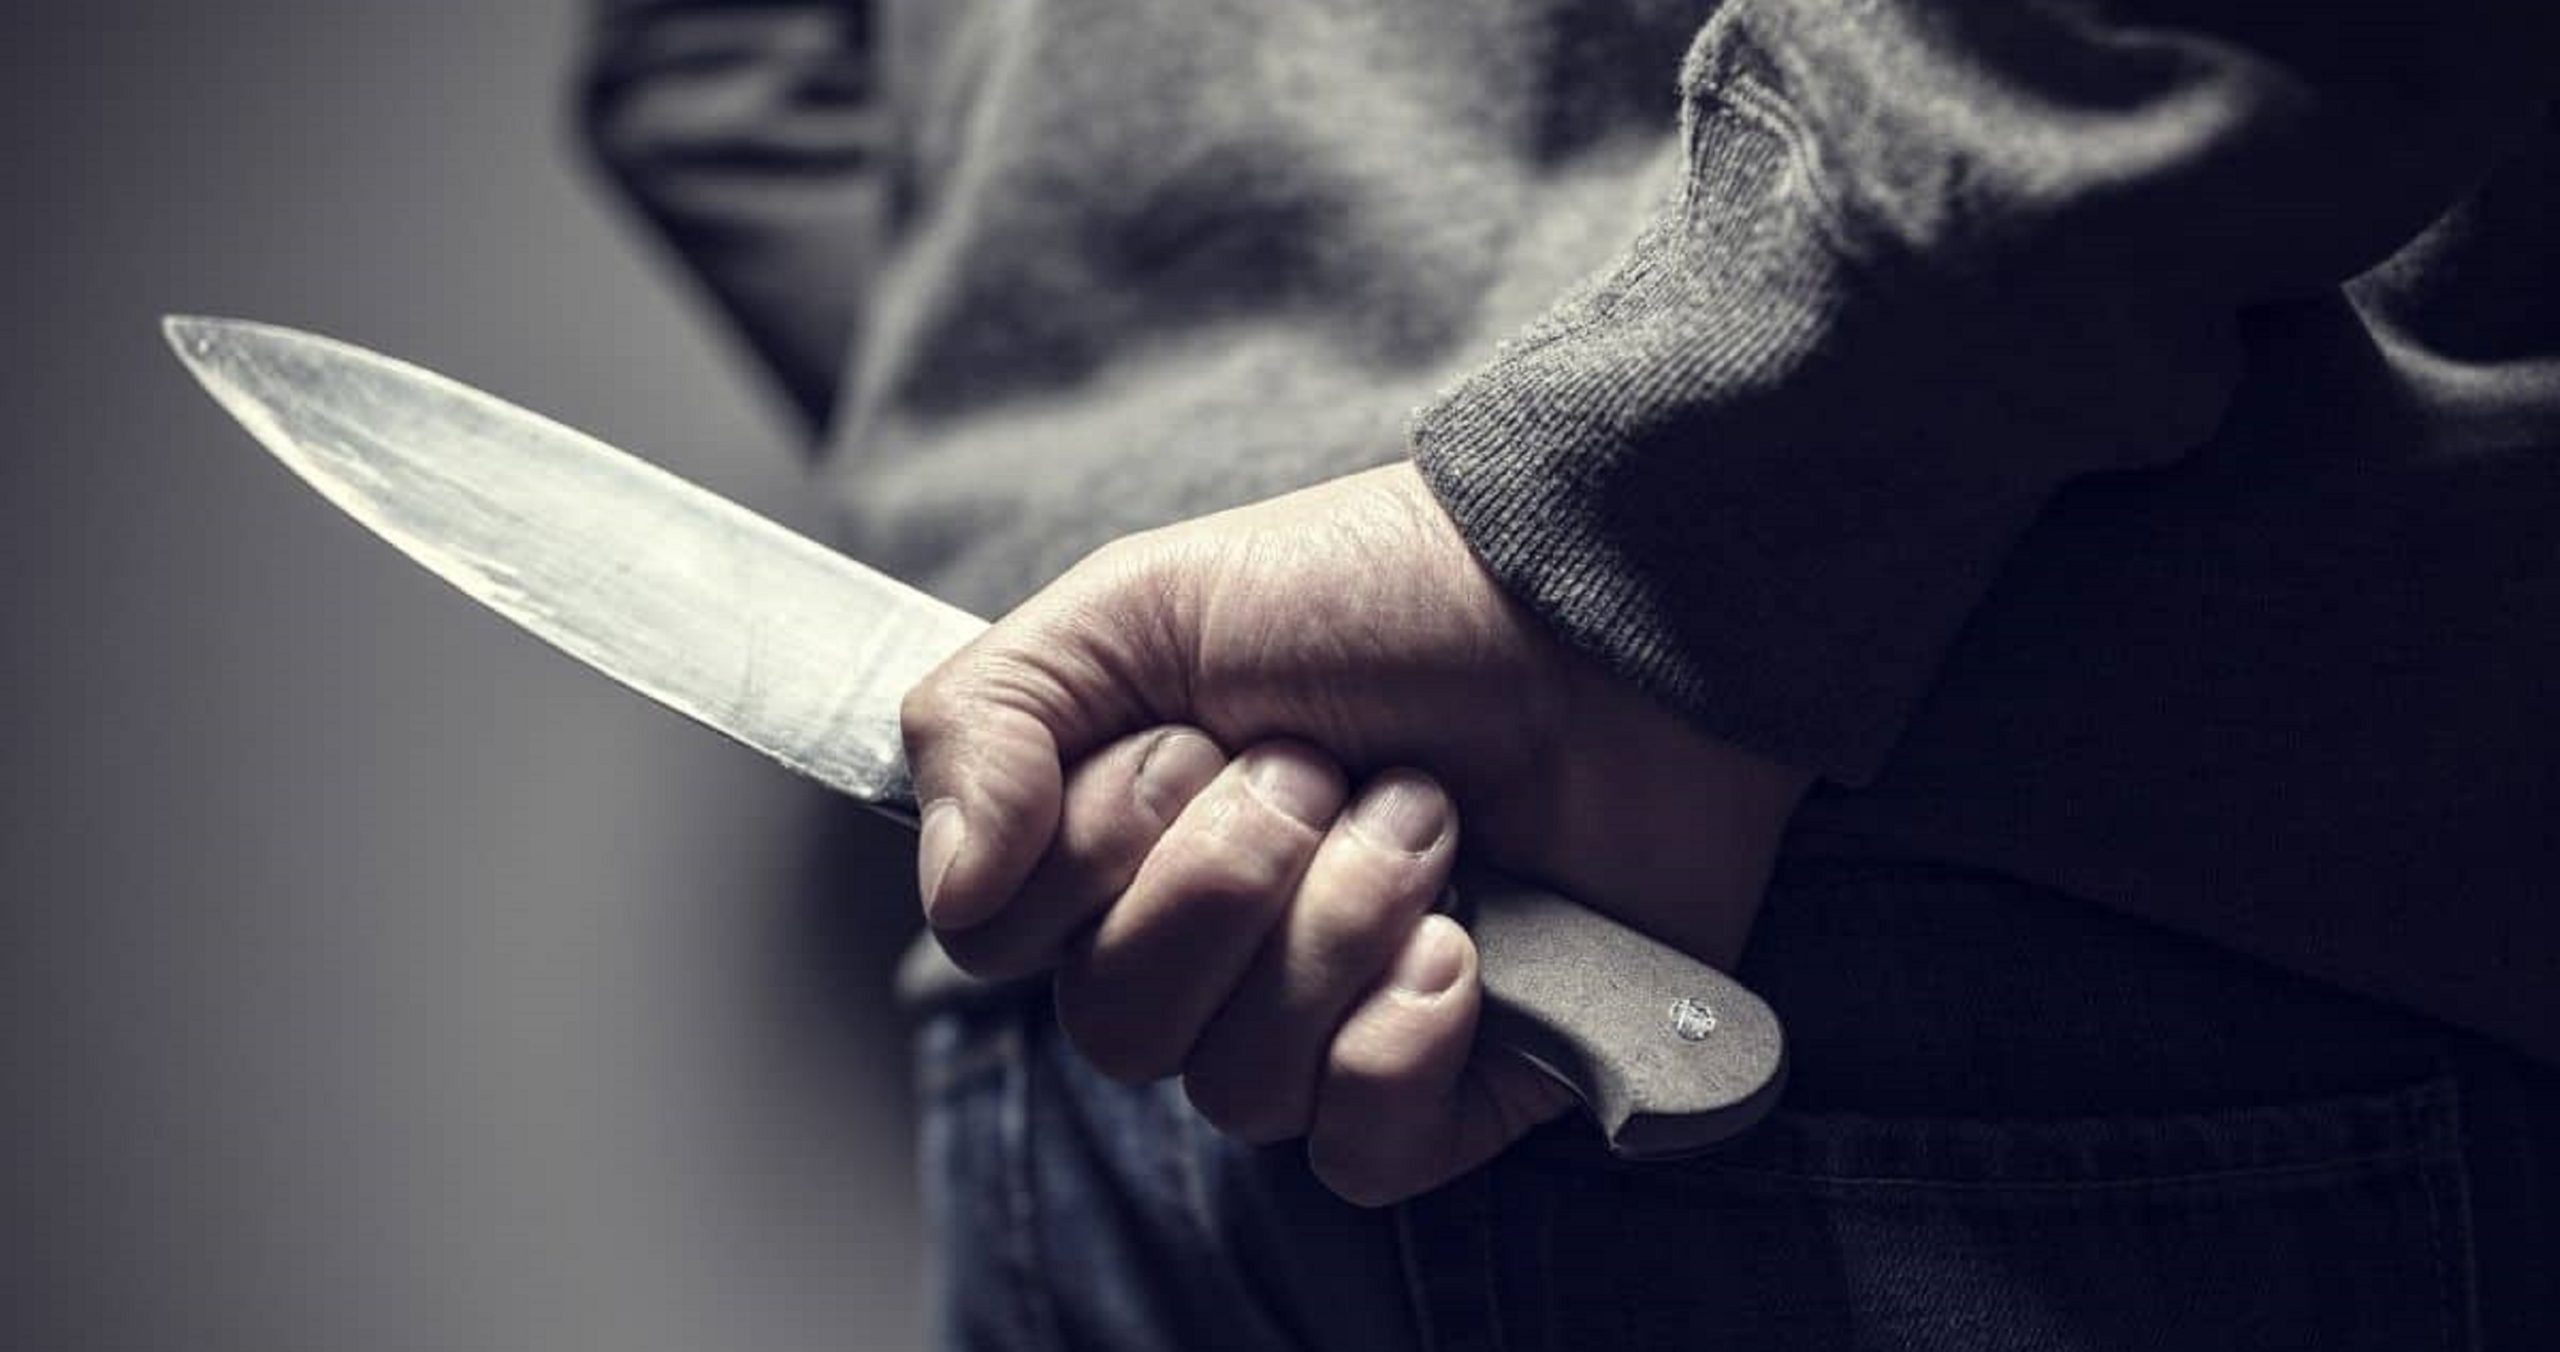 Tamil Nadu Woman Stabs Rapist to Death With His Own Knife In Self-Defence